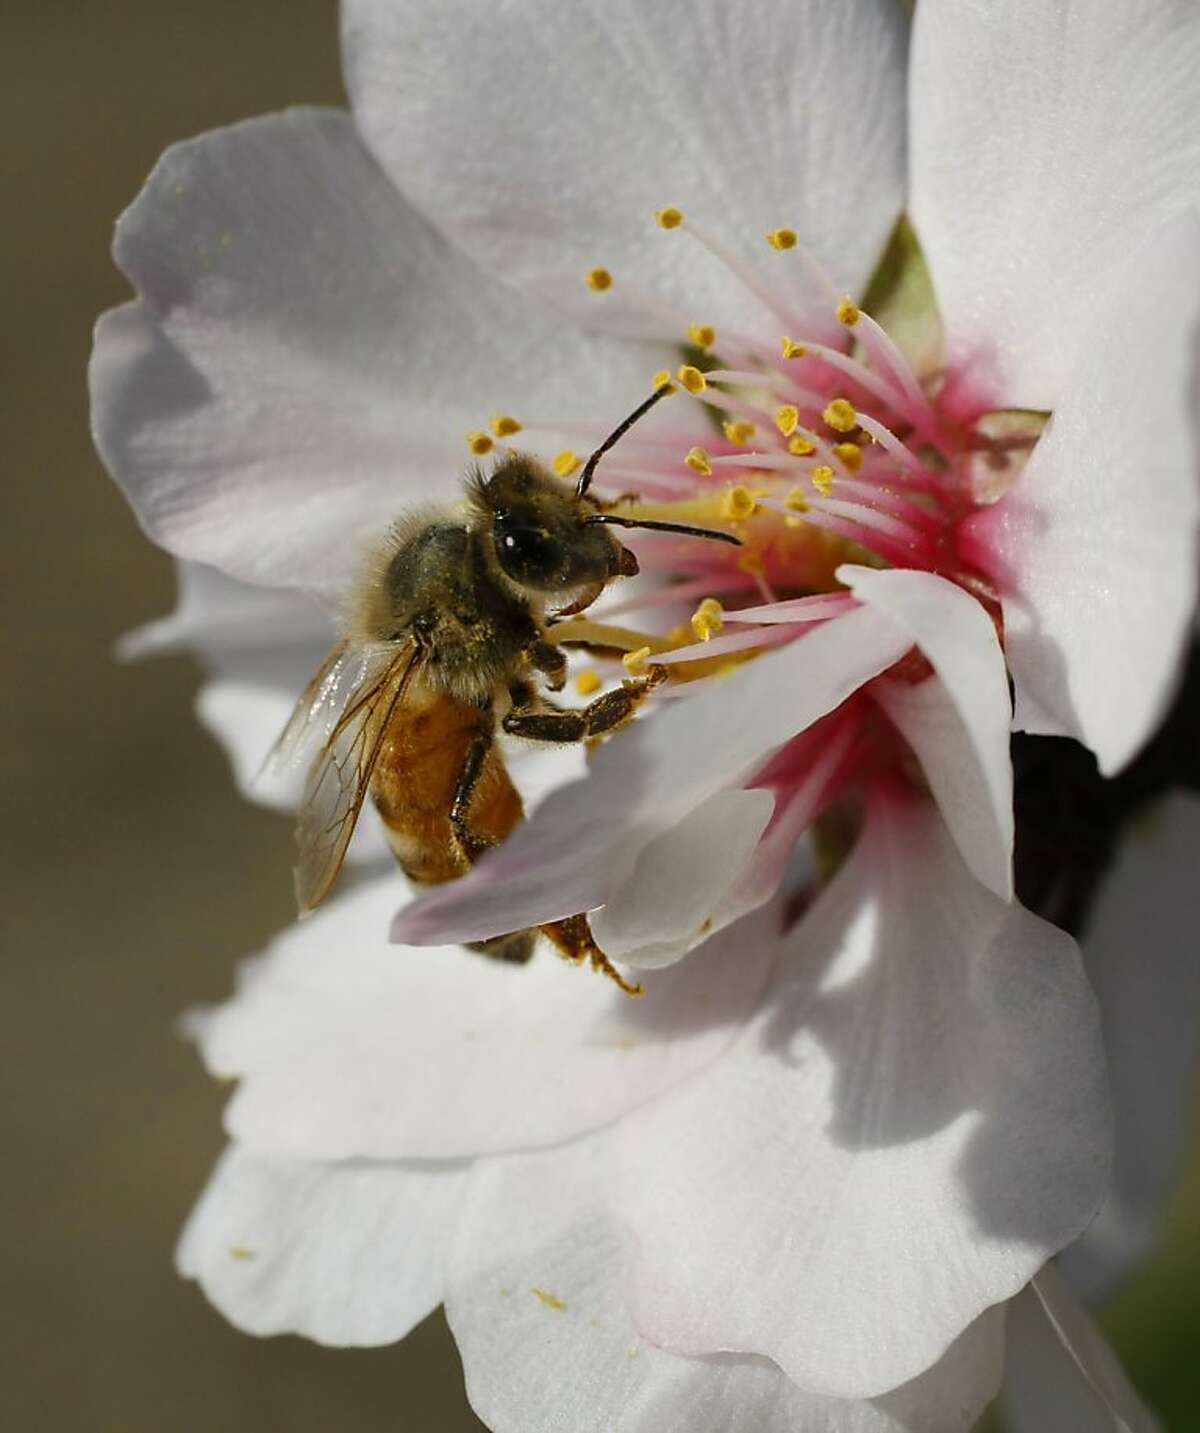 A special breed of honeybee from Arizona gathers pollen from an almond blossom in a Dixon, Calif. orchard on March 3, 2008. Researchers at UC Davis are experimenting with various breeds of bees hoping to find one that can resist the diseases and parasites that are affecting bees throughout the country, a huge threat to agriculture. Bees are needed to pollinate many of California's crops, including the almond trees now in full bloom. Photo by Michael Maloney / San Francisco Chronicle